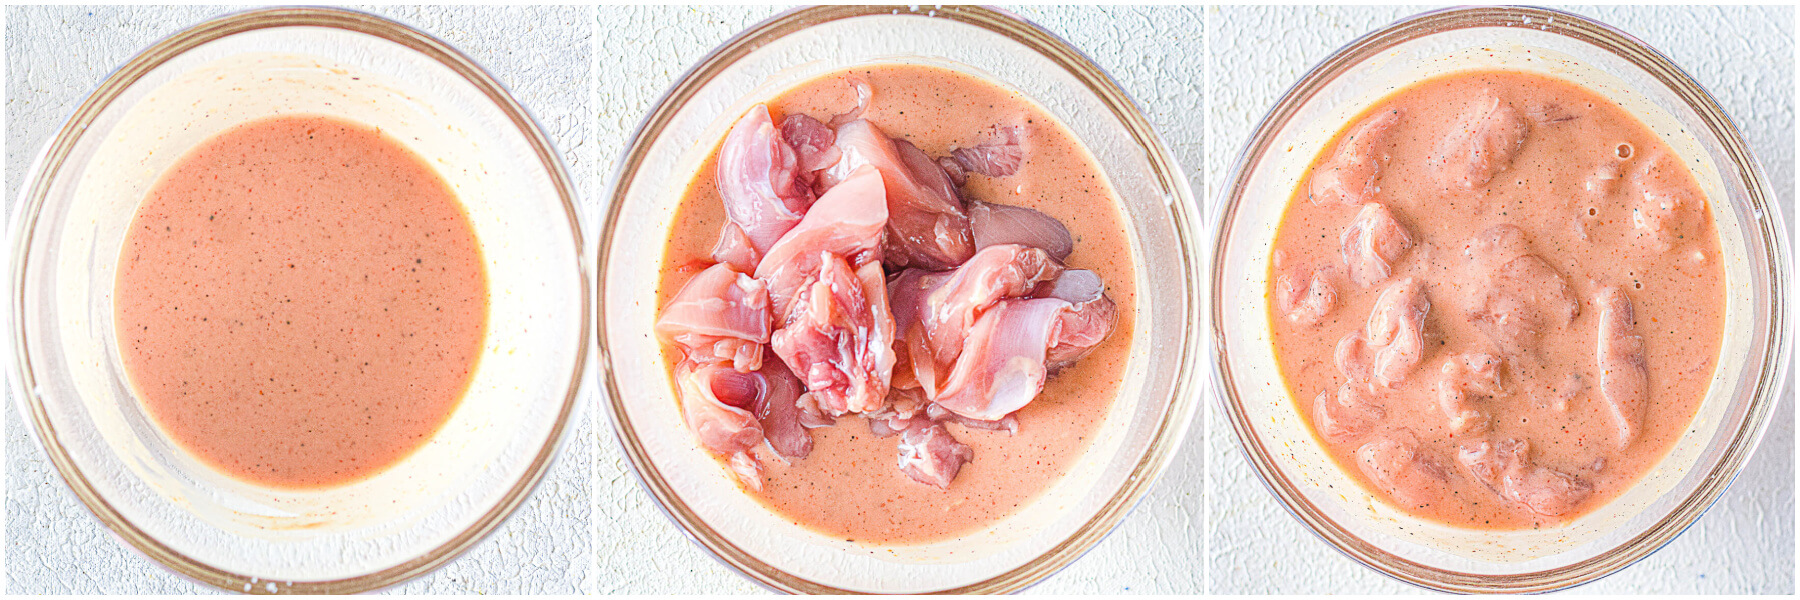 Process images showing how to marinate mochiko chicken.